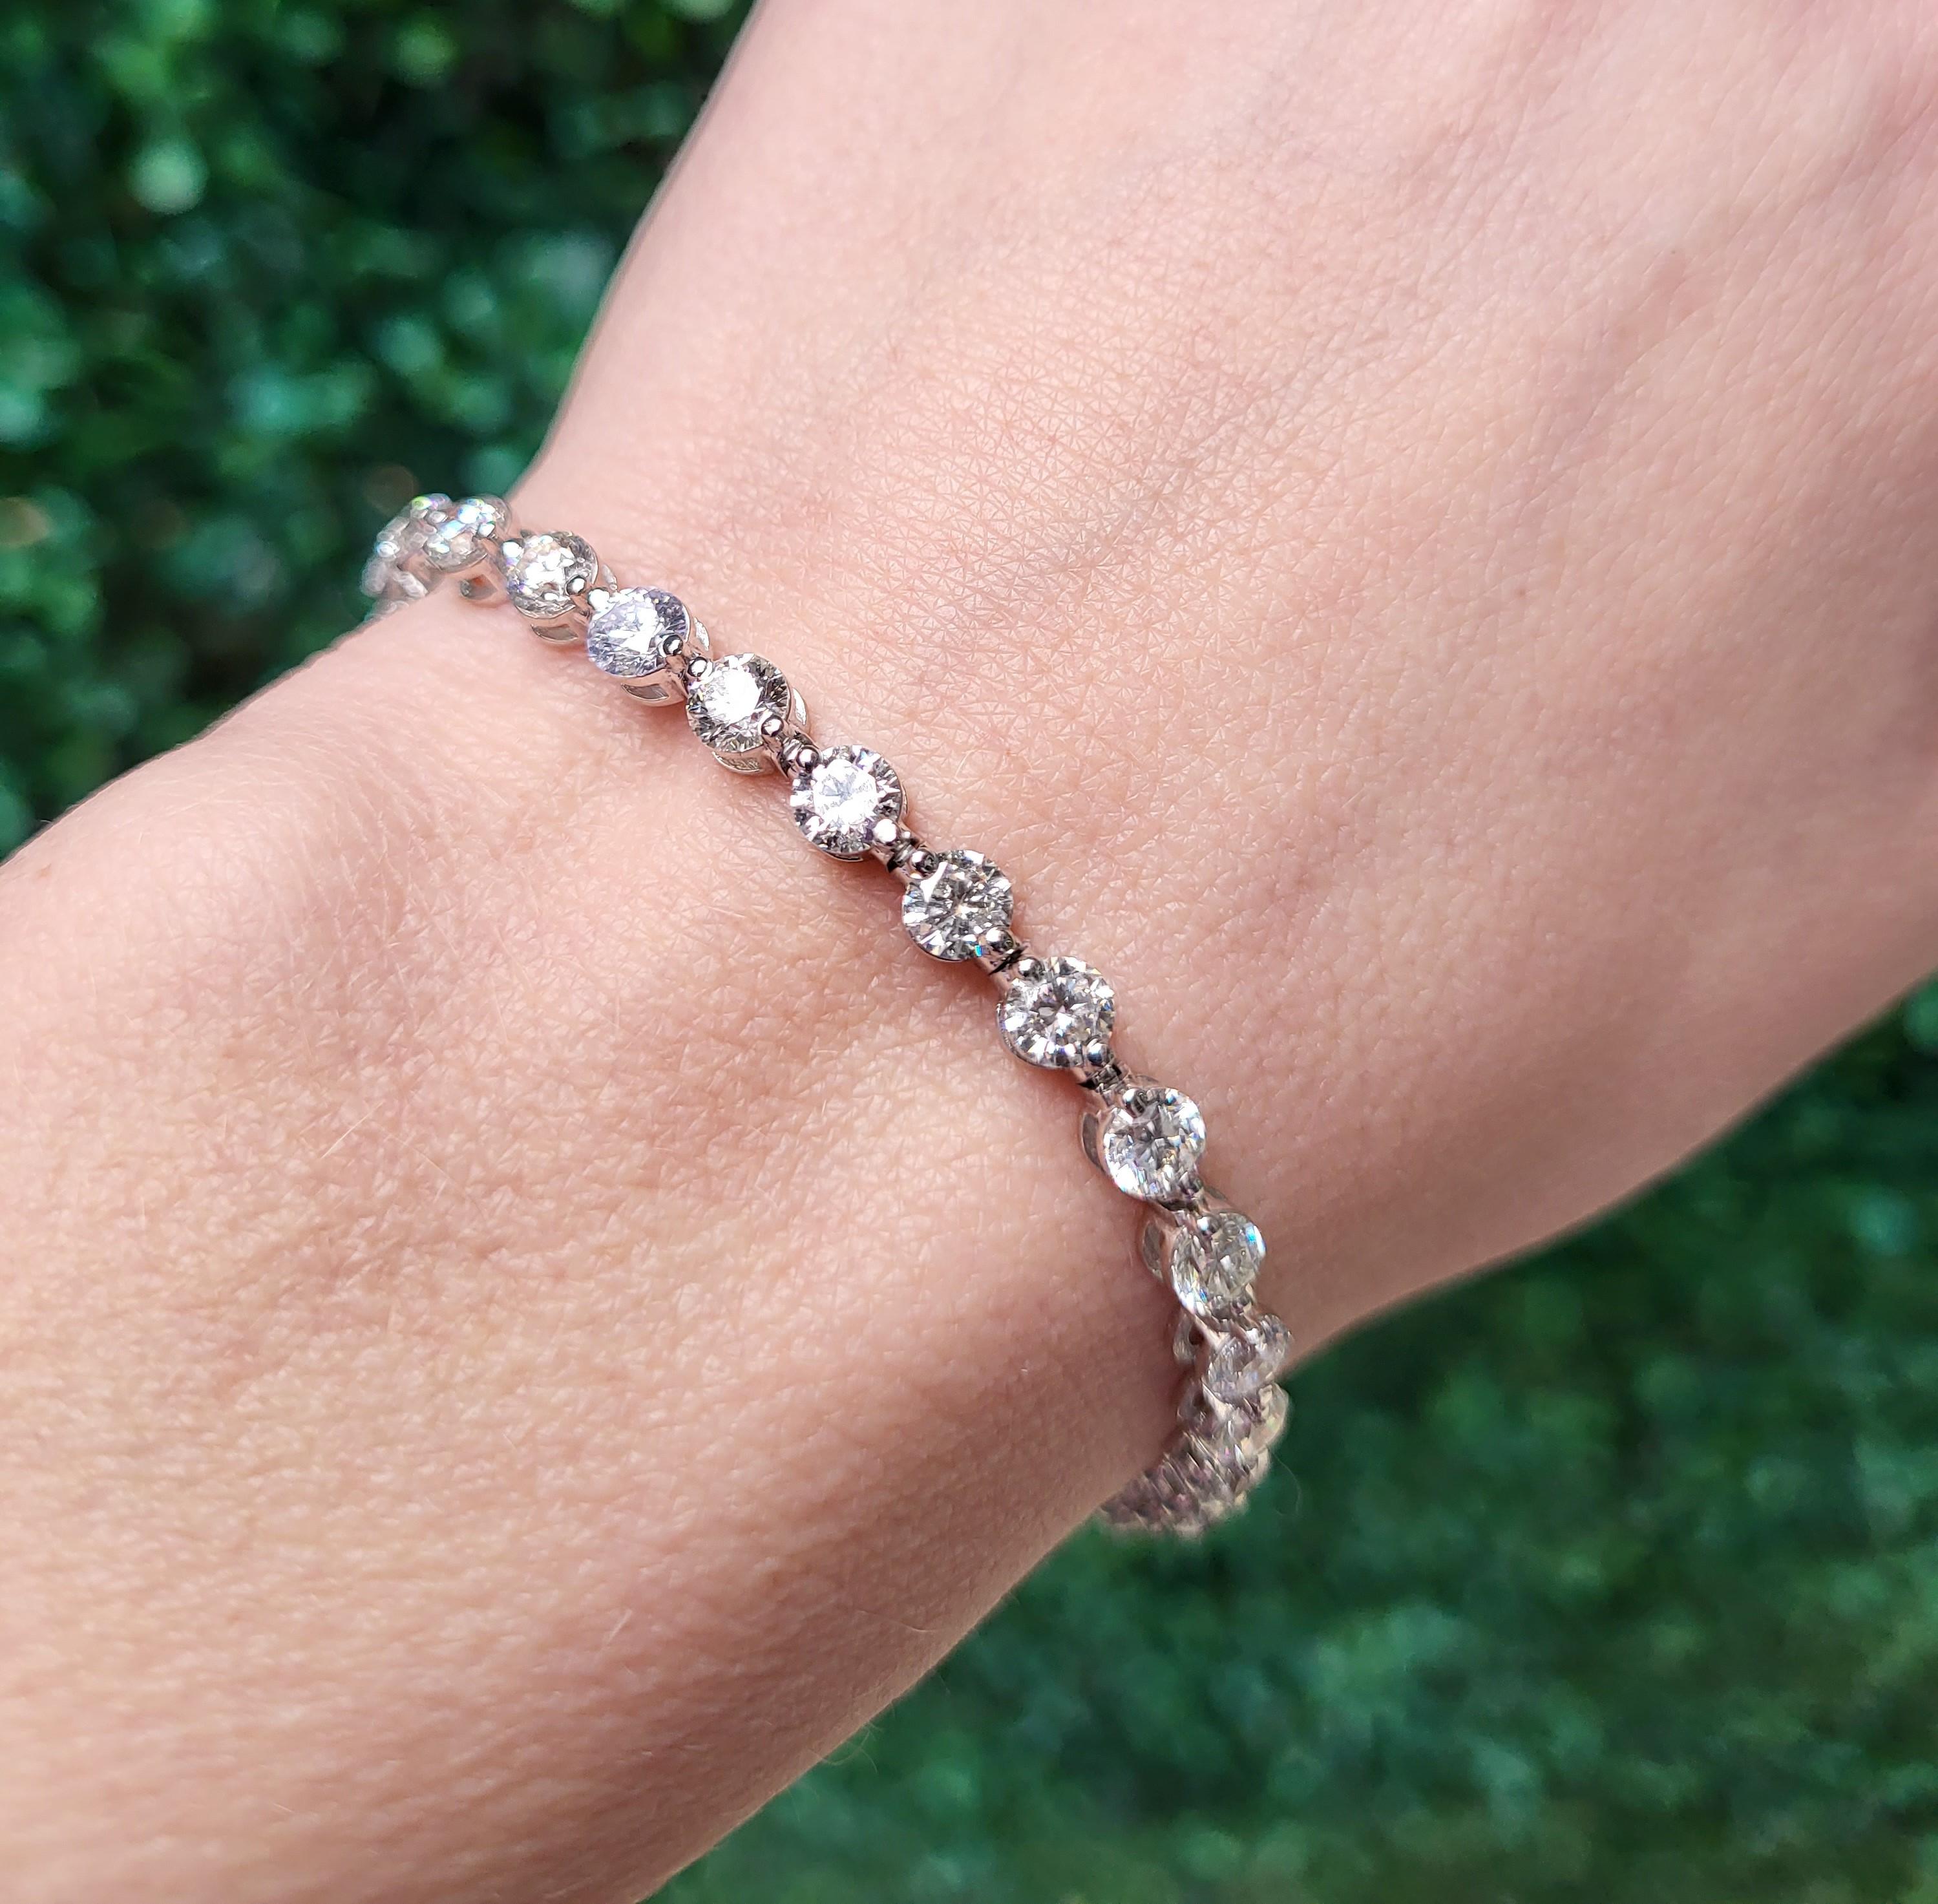 This diamond tennis bracelet features 10 carat total weight in single prong round brilliant cut diamonds set in 14 karat white gold. Box clasp with safety clasp. The length is 7